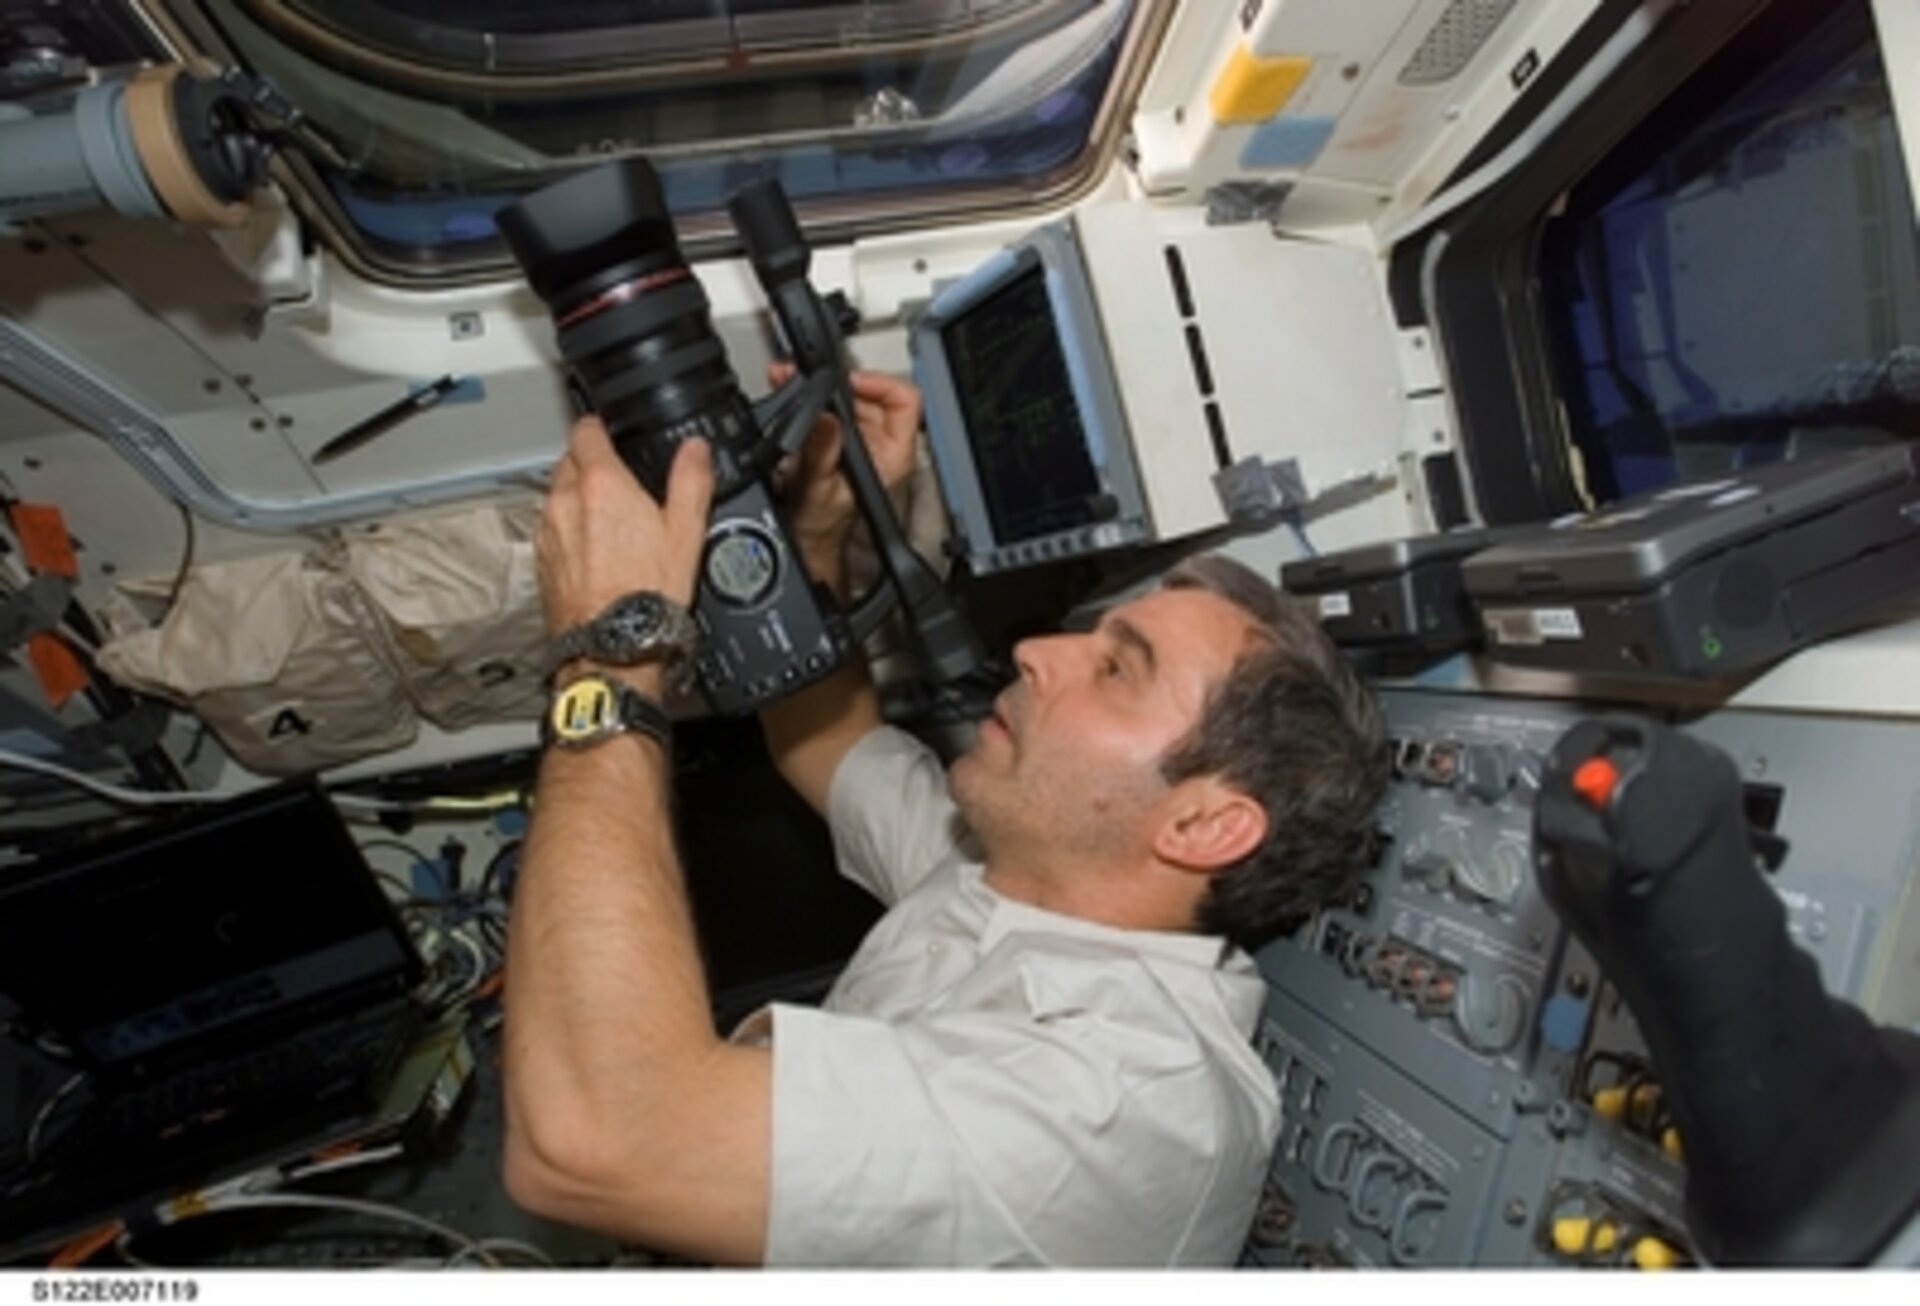 ESA astronaut Leopold Eyharts, STS-123 mission specialist, 2008.